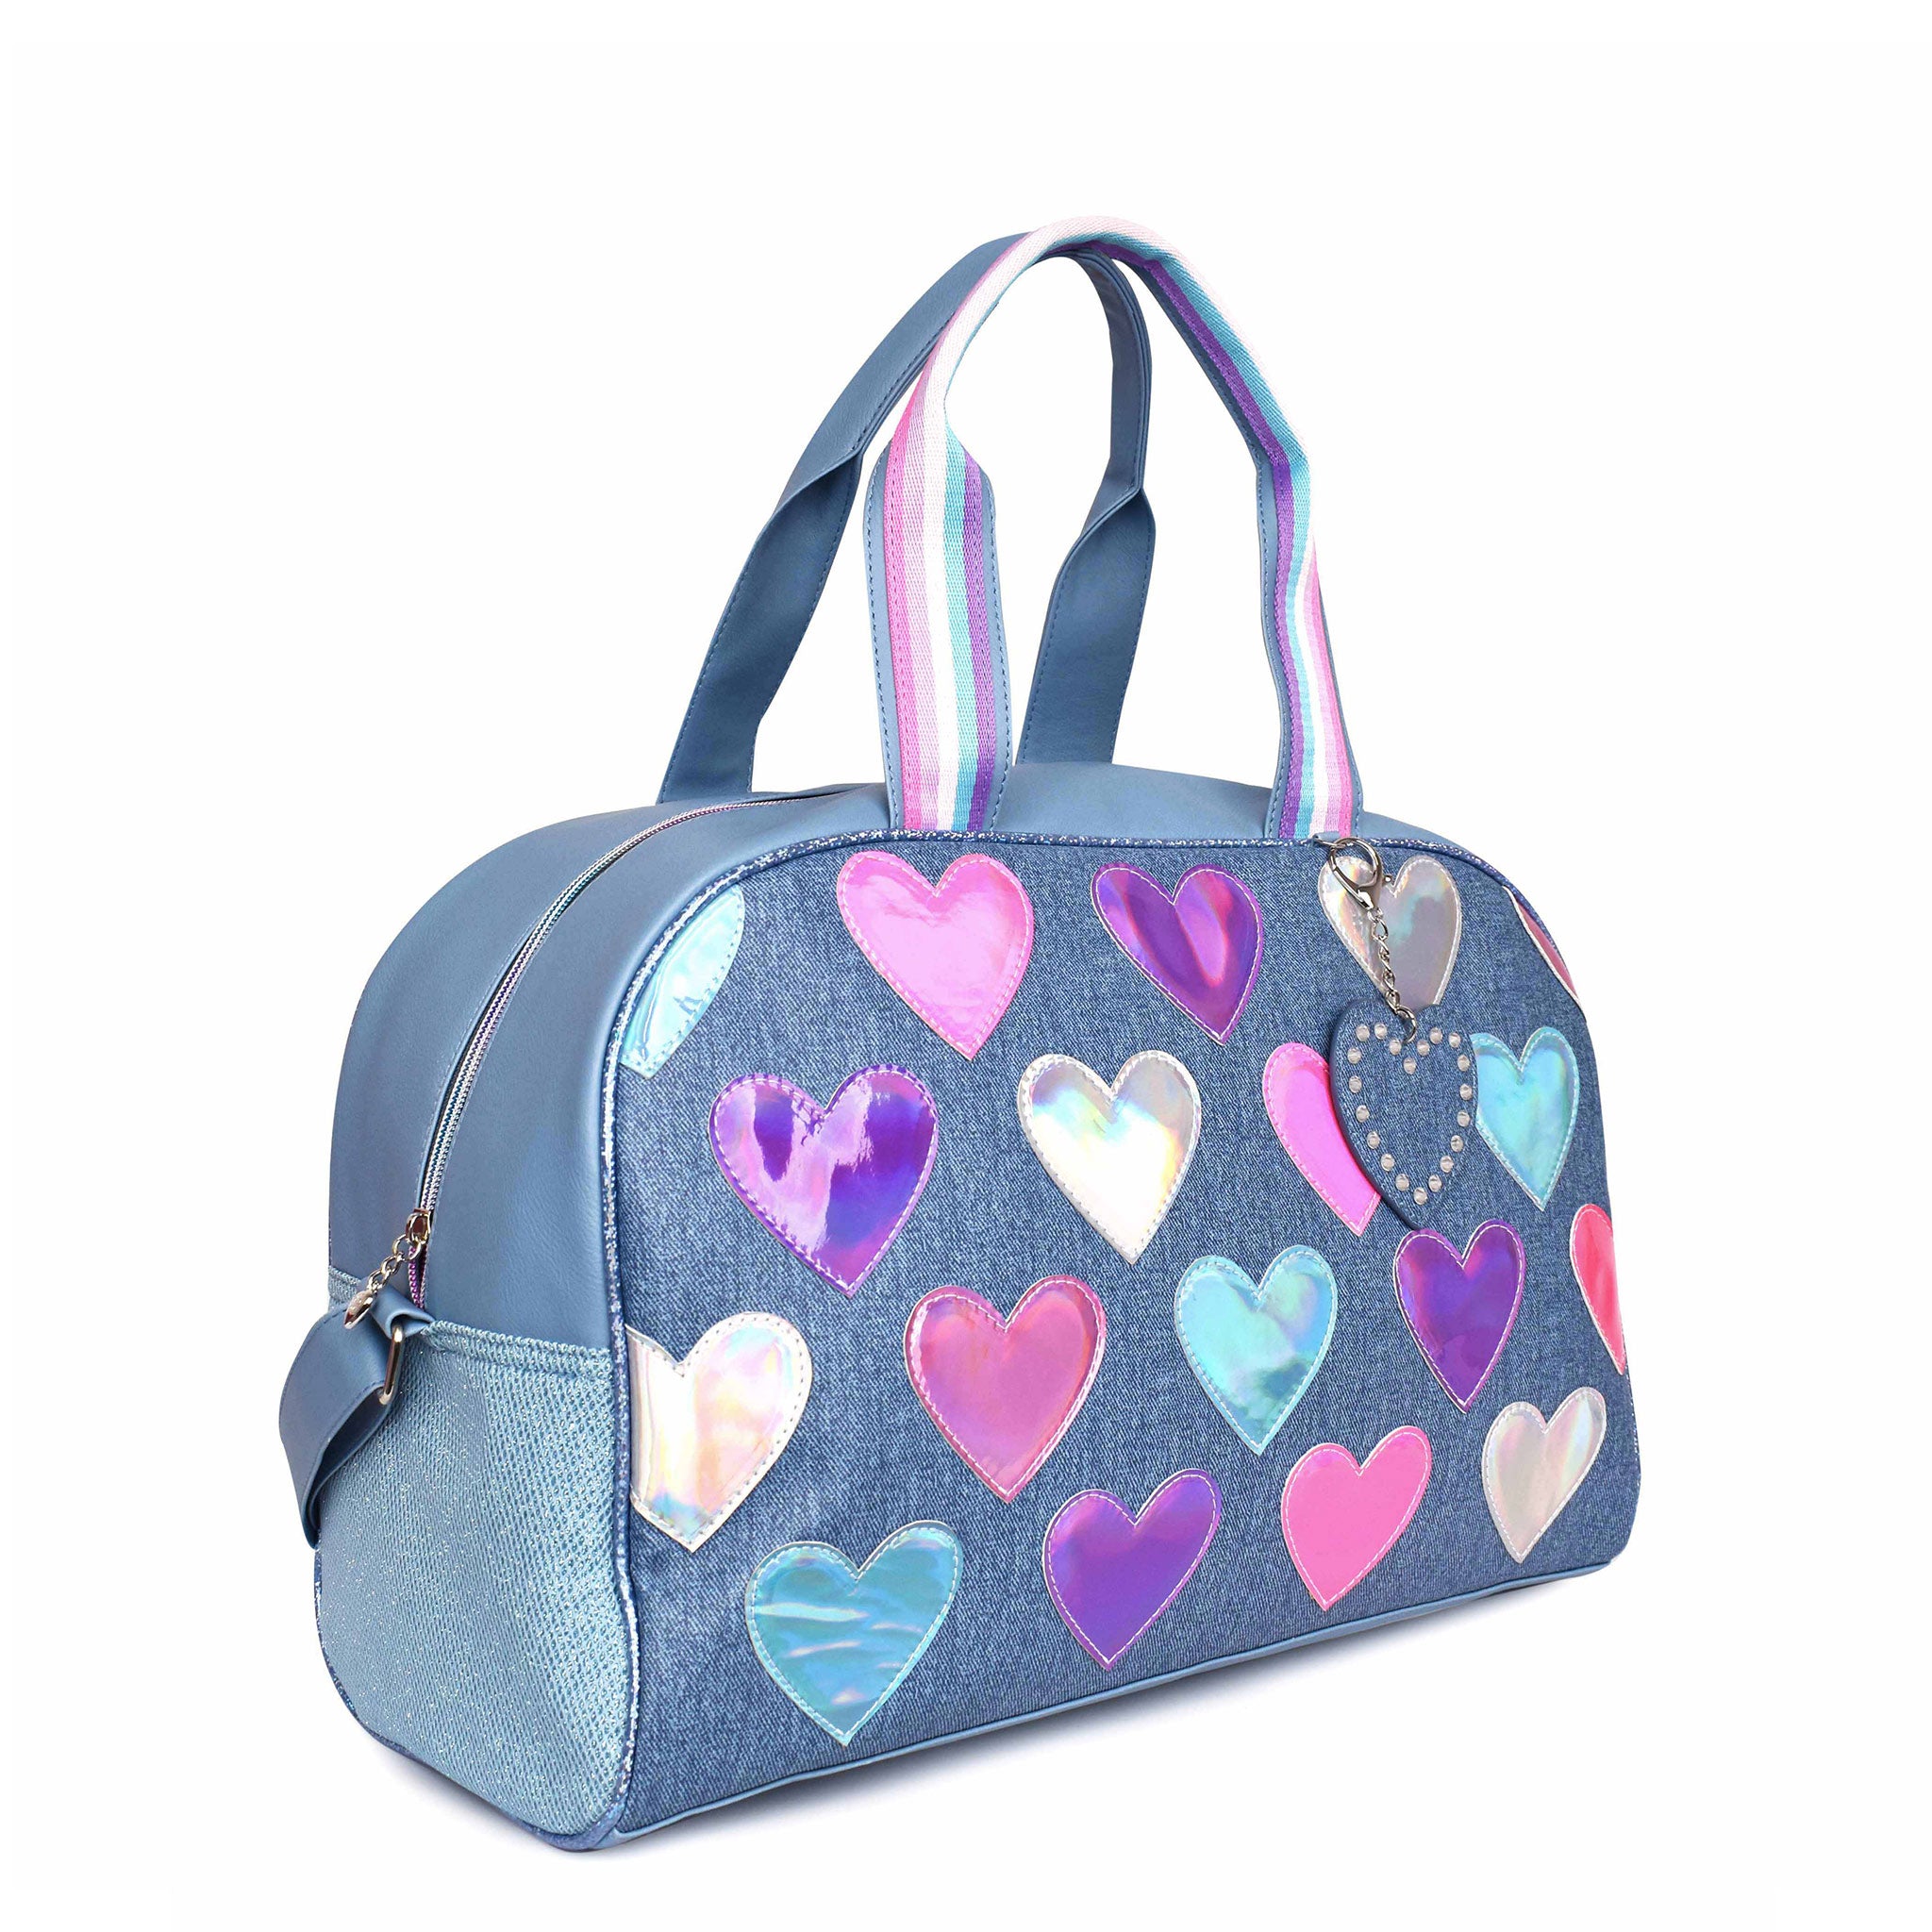 Side view of a denim large duffle bag with metallic heart patches and a heart shaped keychain